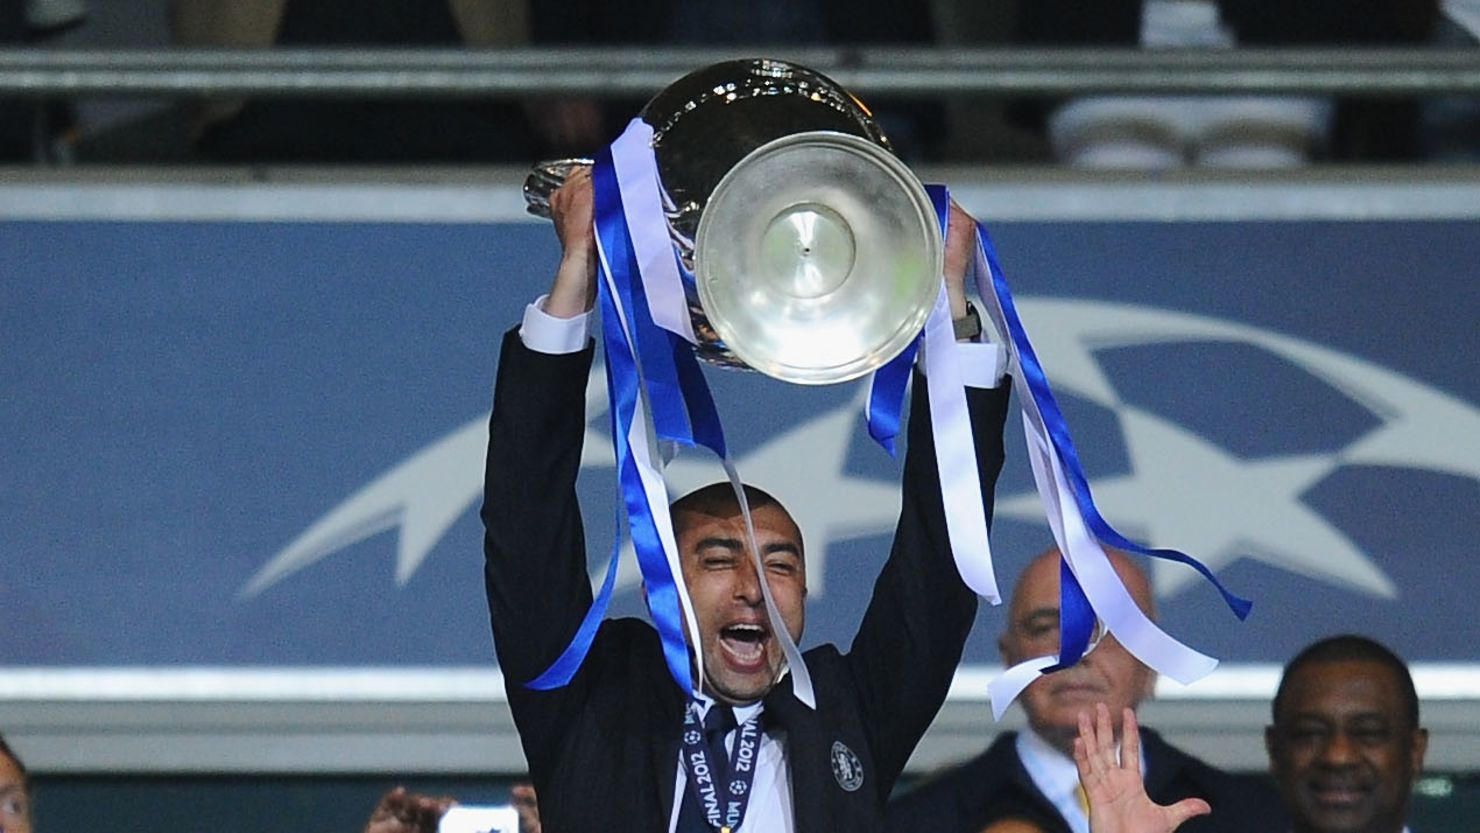 New Chelsea manager Roberto di Matteo spent six years at the club as a player between 1996 and 2002.